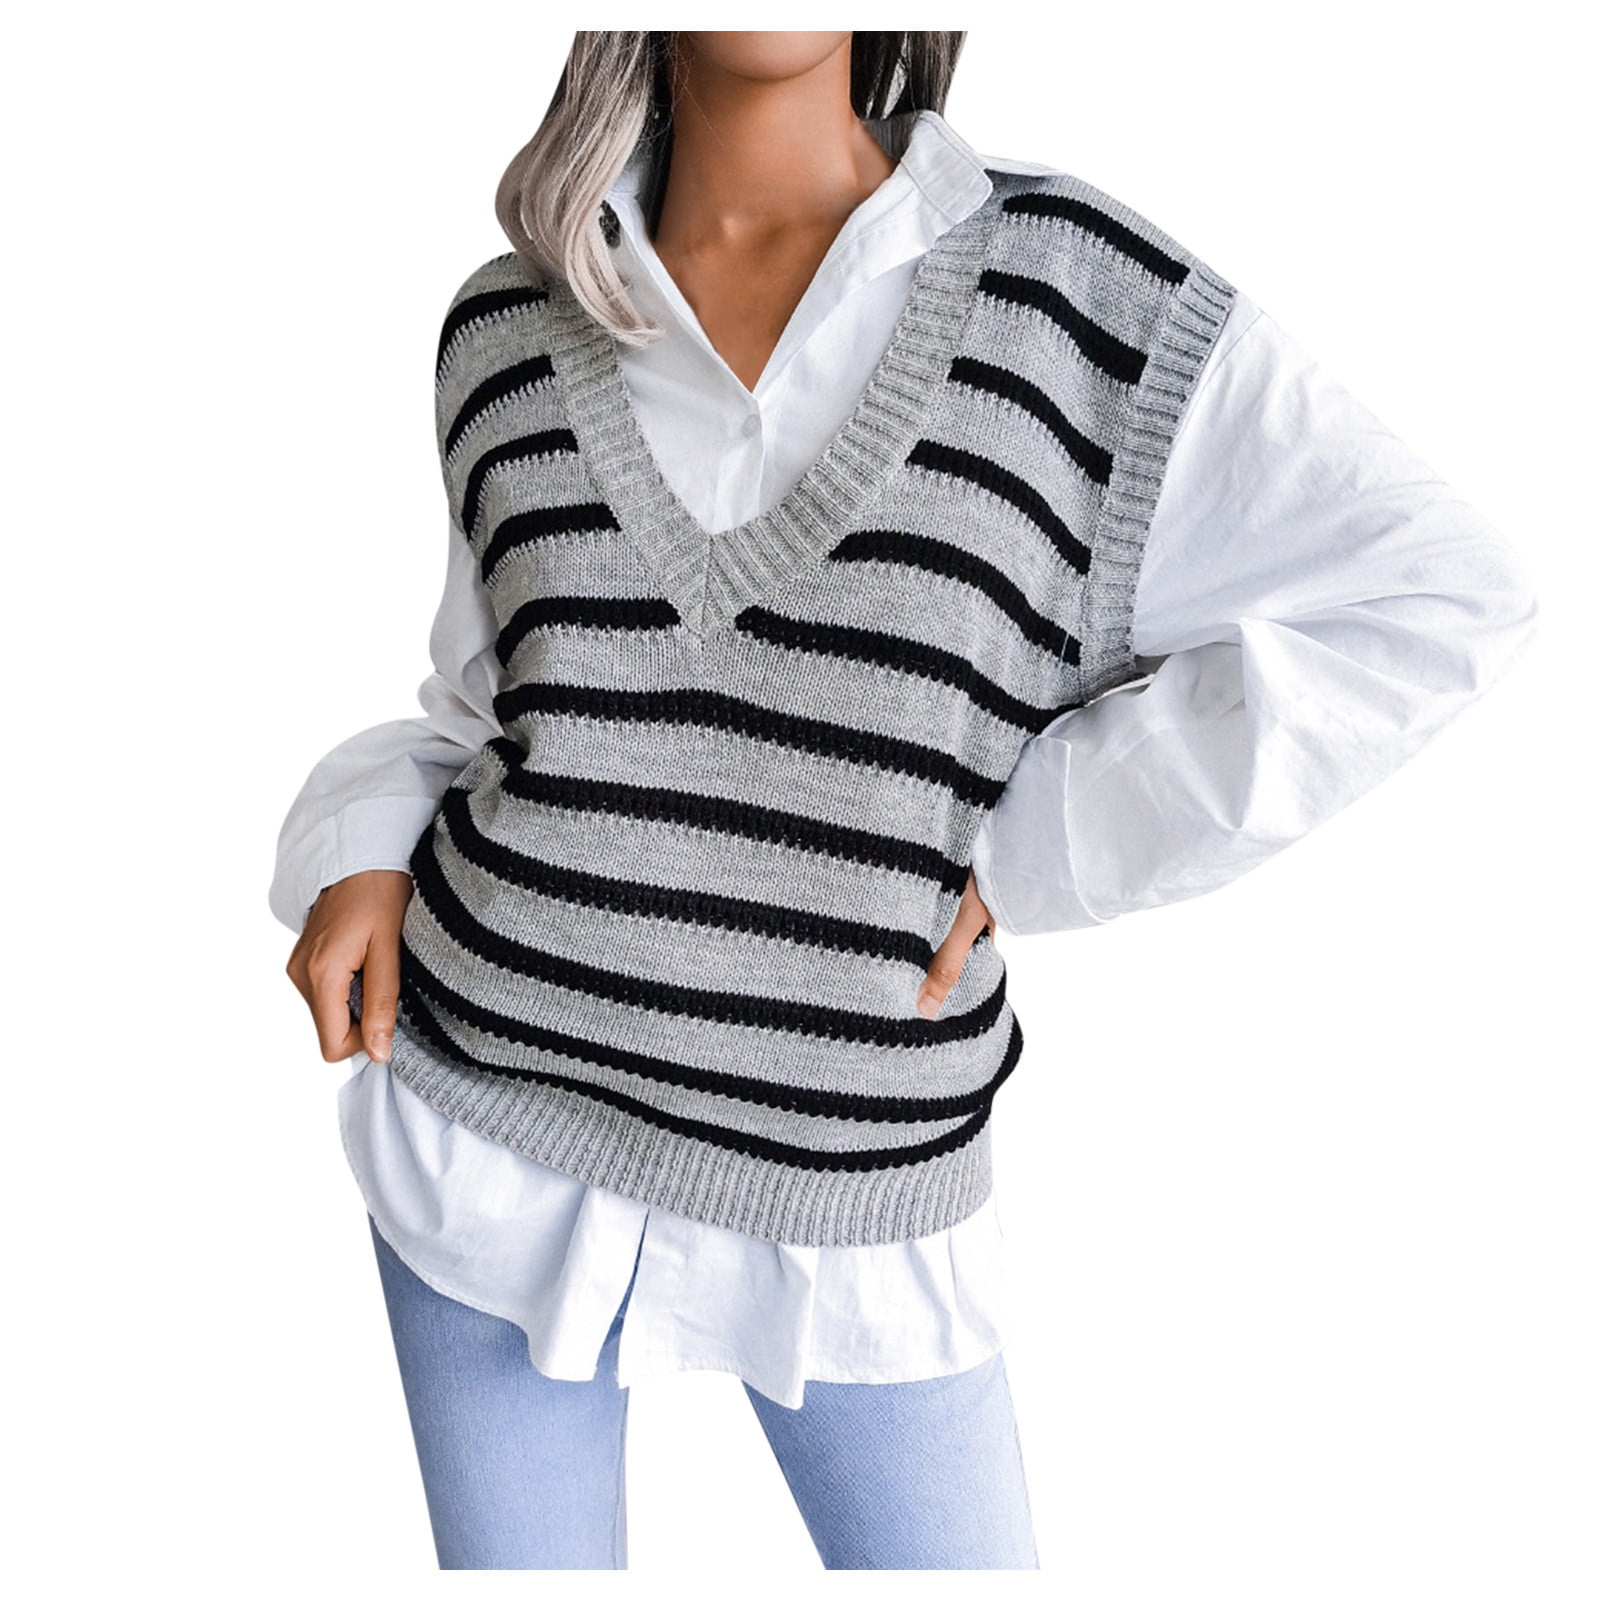 Womens V Neck Pullovers Sea Stripes Sweaters Lightweight Rib Chunky Casual Jumper Tops